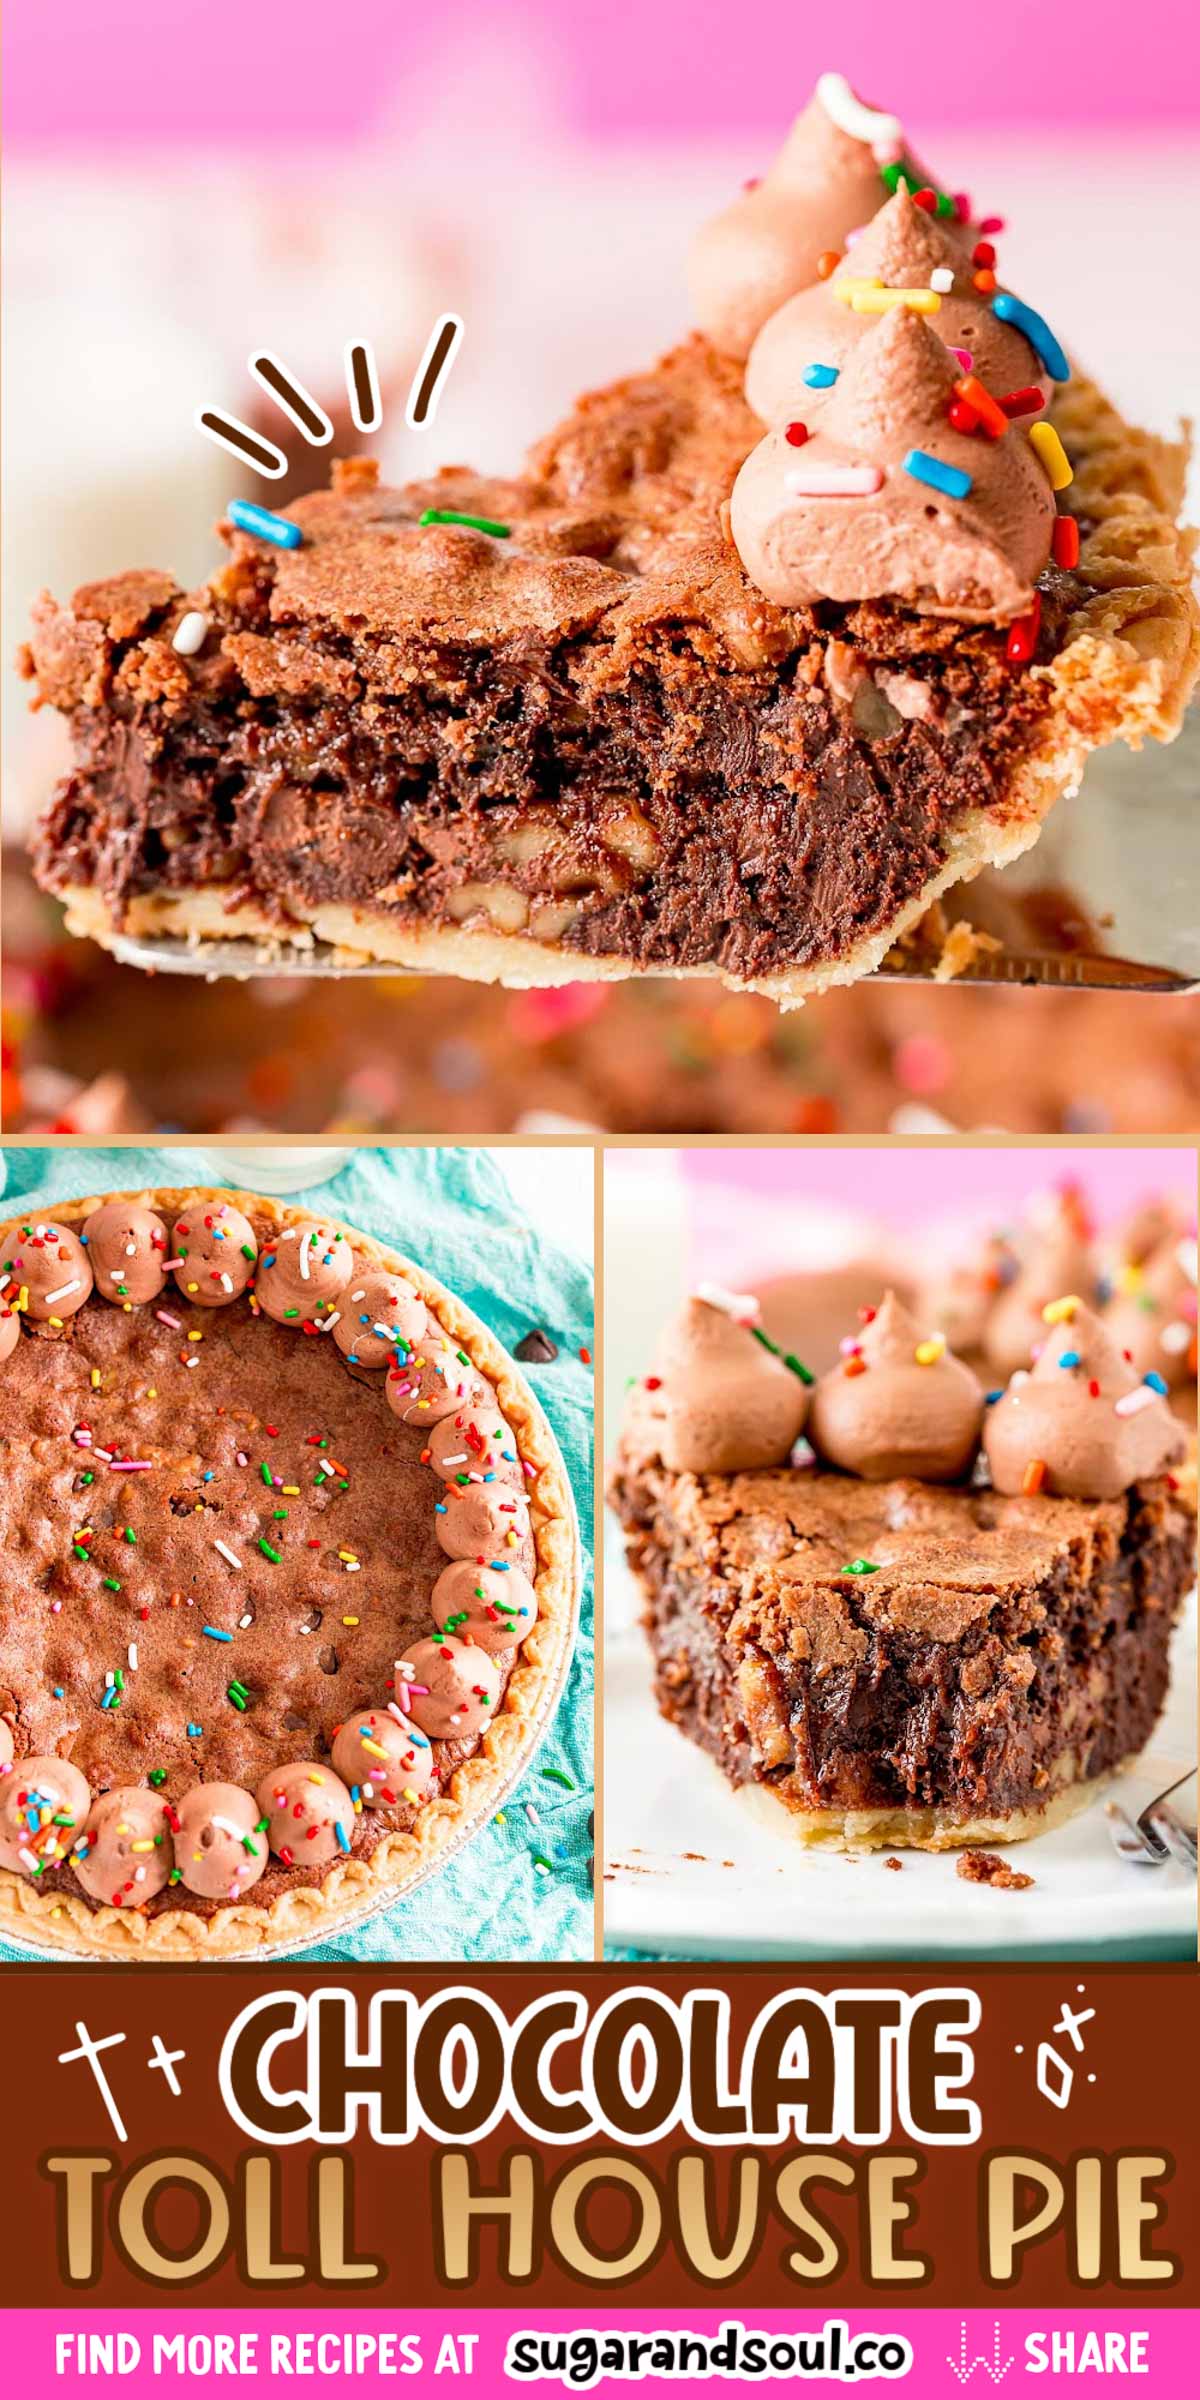 Chocolate Toll House Pie consists of a chocolate cookie filling on a buttery pie crust. Loaded with chocolate chips and walnuts, it tastes delicious served warm with whipped cream or vanilla ice cream.  via @sugarandsoulco